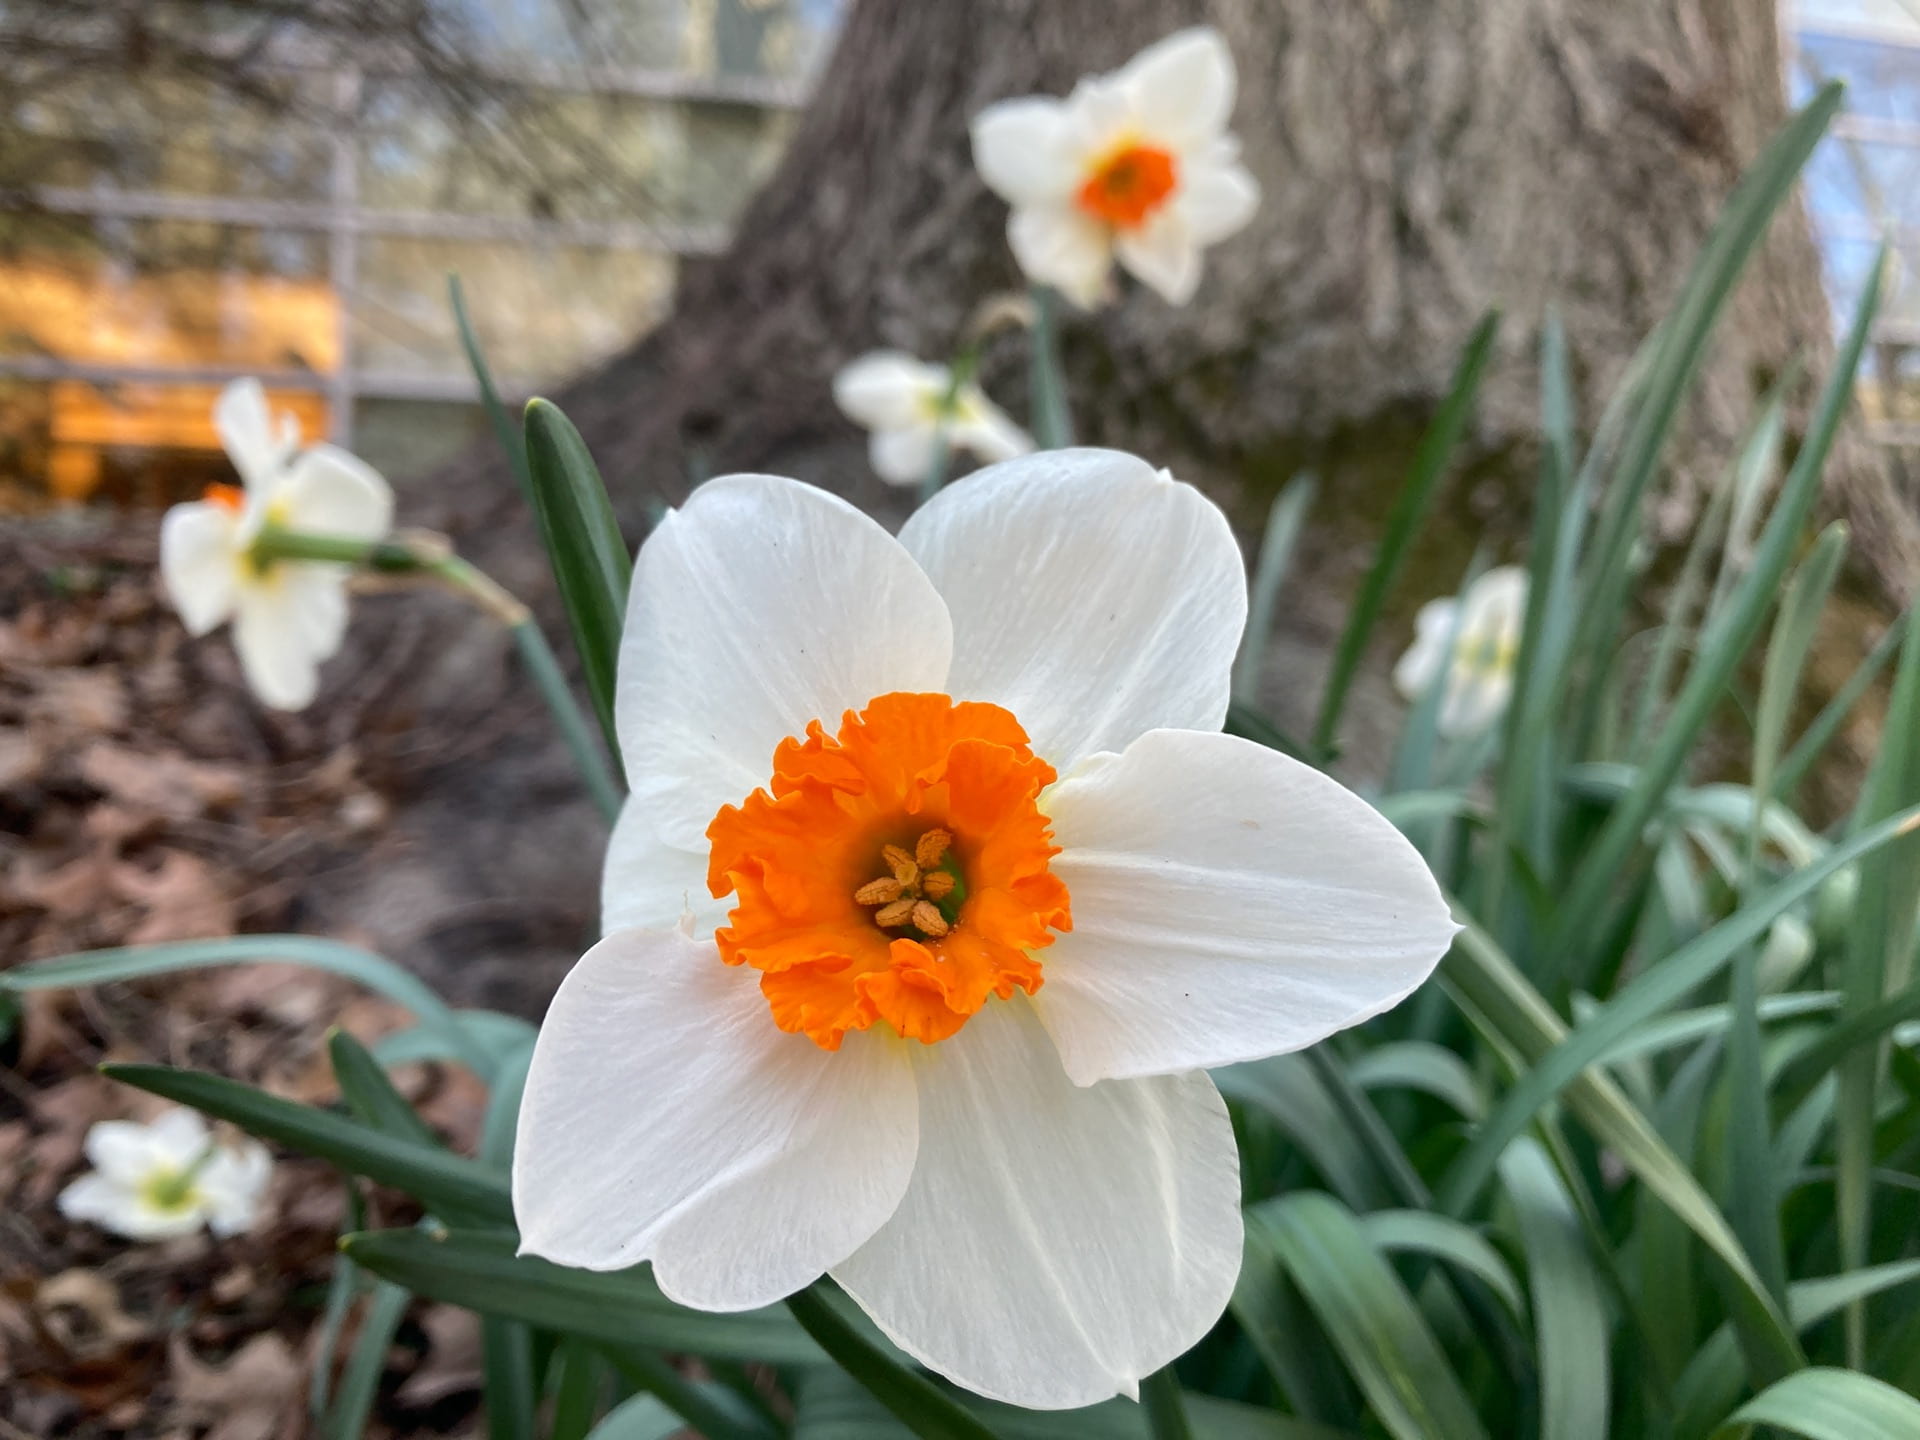 Narcissus 'Barrett Browning' blooms at the base of a red oak.